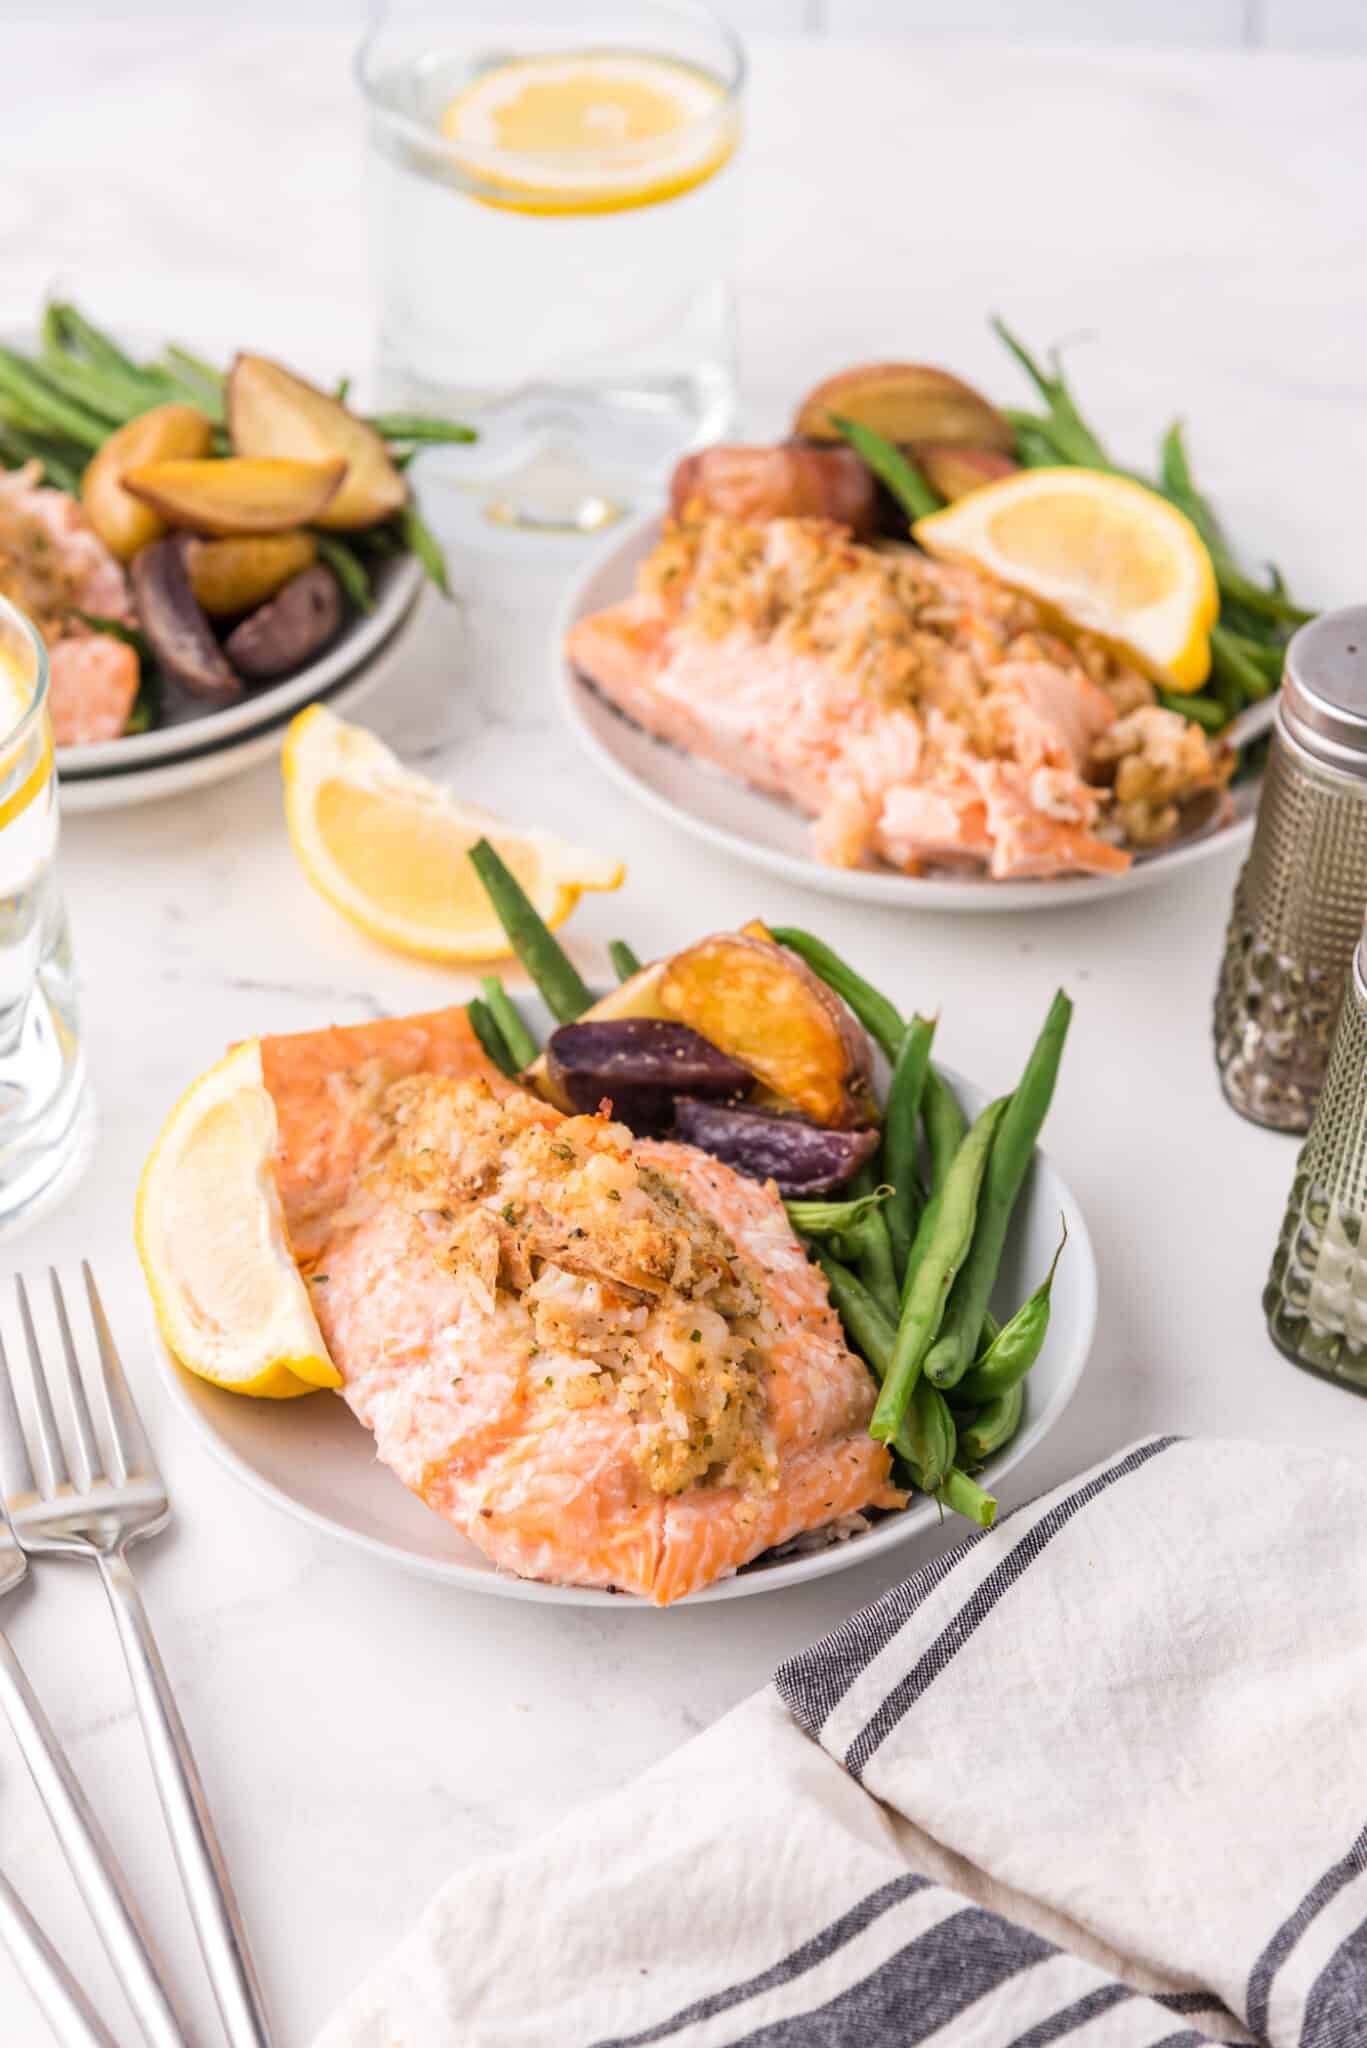 Stuffed salmon with green beans and potatoes on white plates.